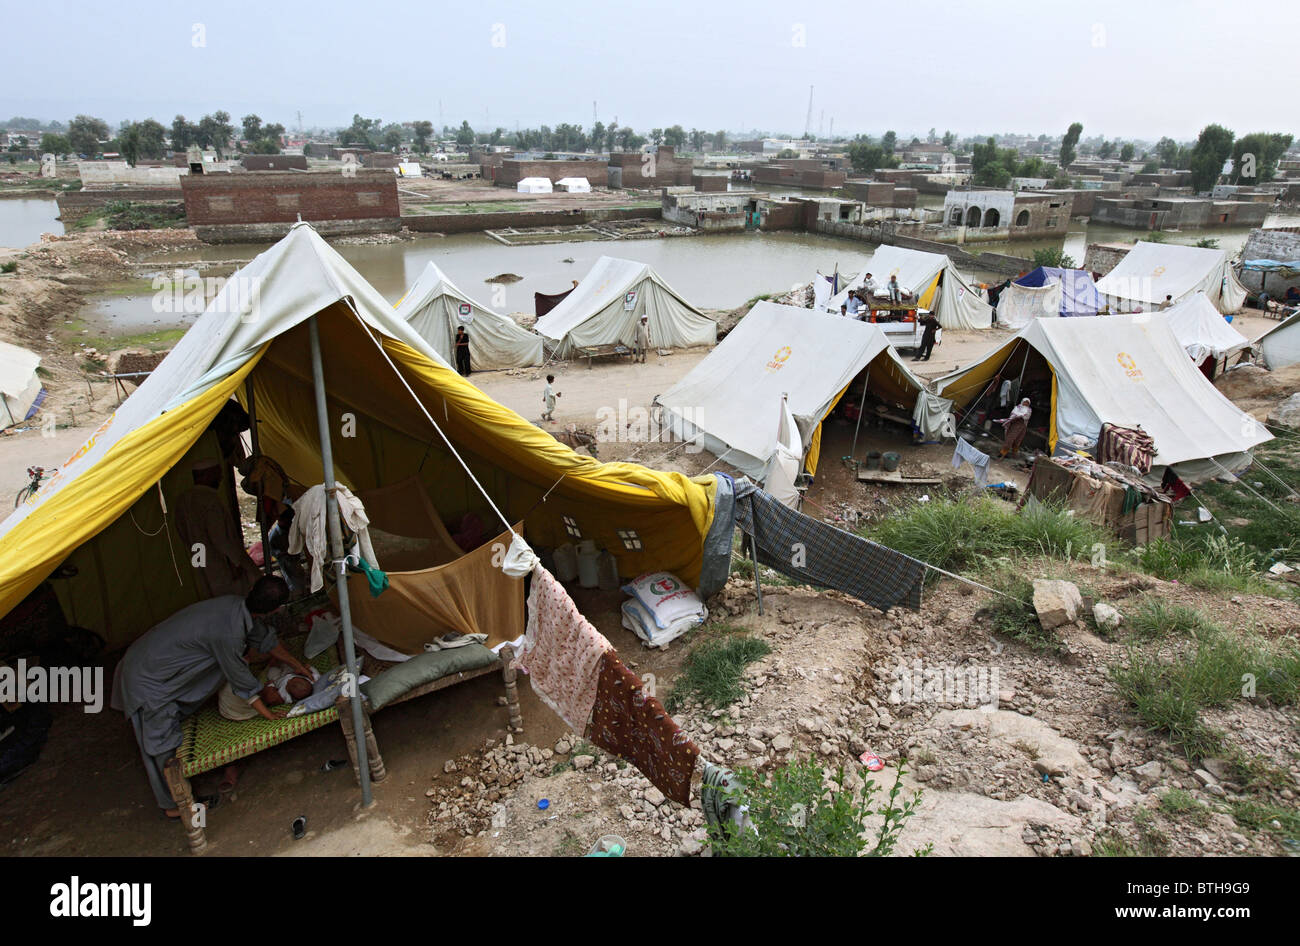 A tent city for refugees after a flood, Nowshera, Pakistan Stock Photo